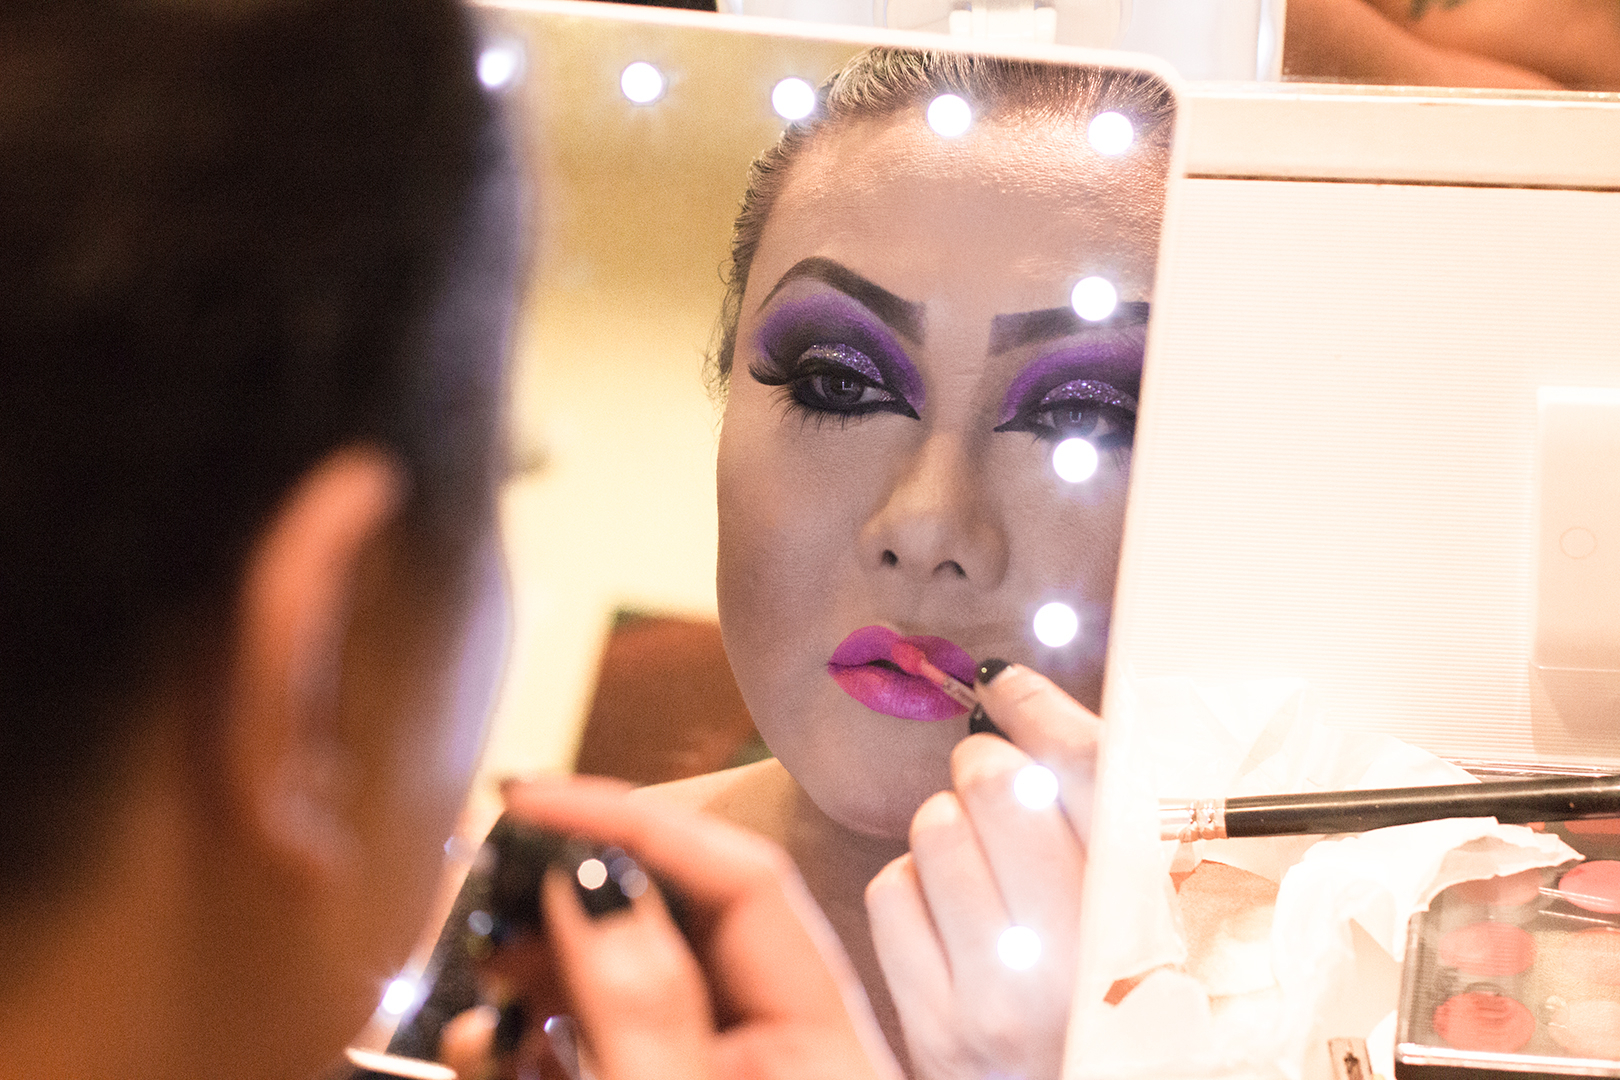 Drag Eye Makeup A Drag Queens Top Tips For Beauty On A Budget Allies Agenda